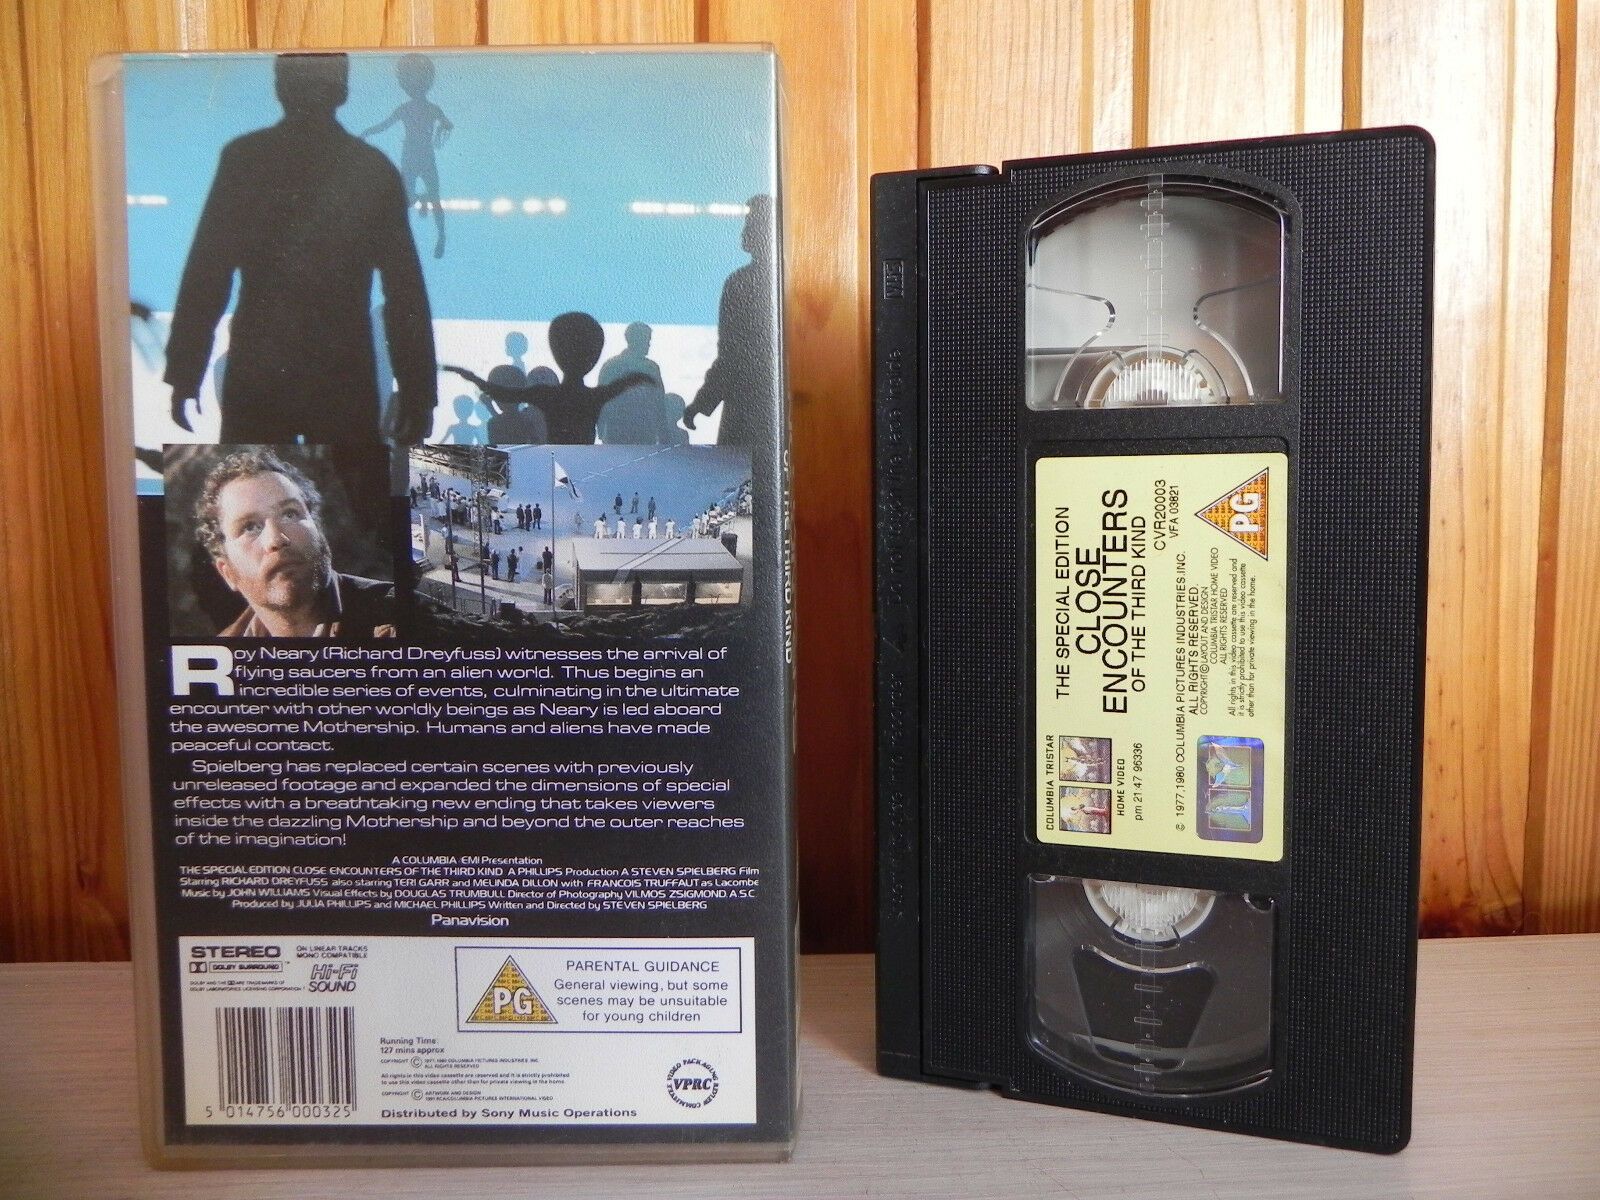 Close Encounters Of The Thrid Kind; [Special Edition] - Sci-Fi - Steven Spielberg - Pal VHS-